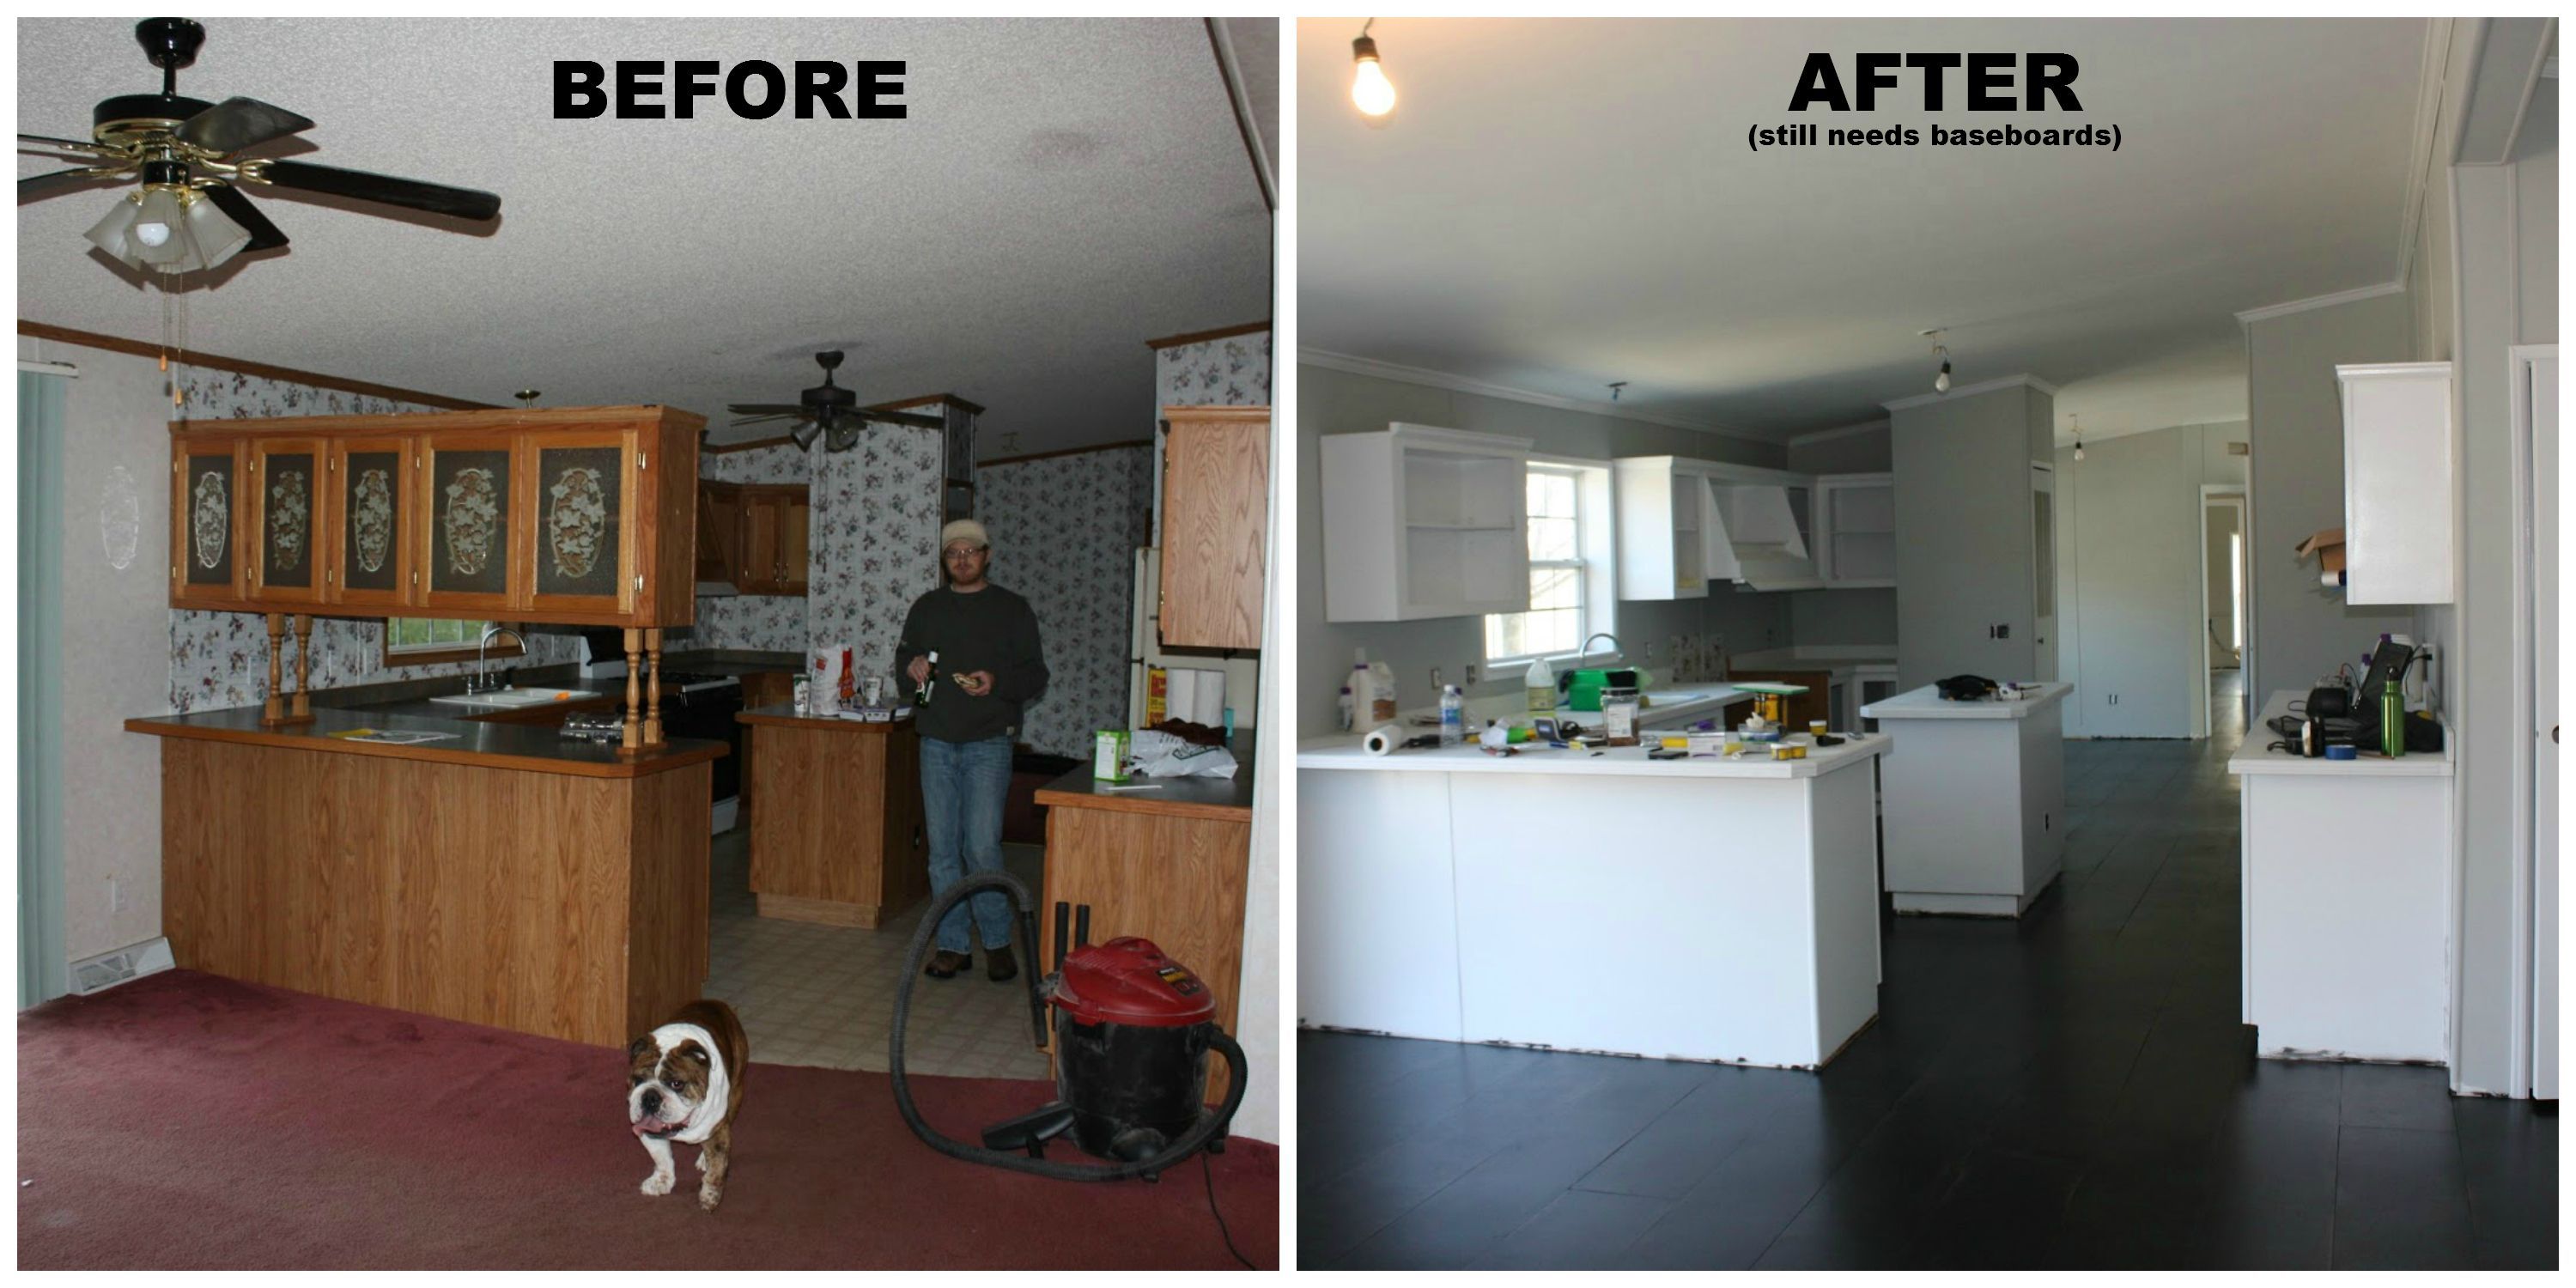 Manufactured home kitchen renovation: carpet replaced with plywood plank floors. By Erin Westrate & husband at “All Quiet on the